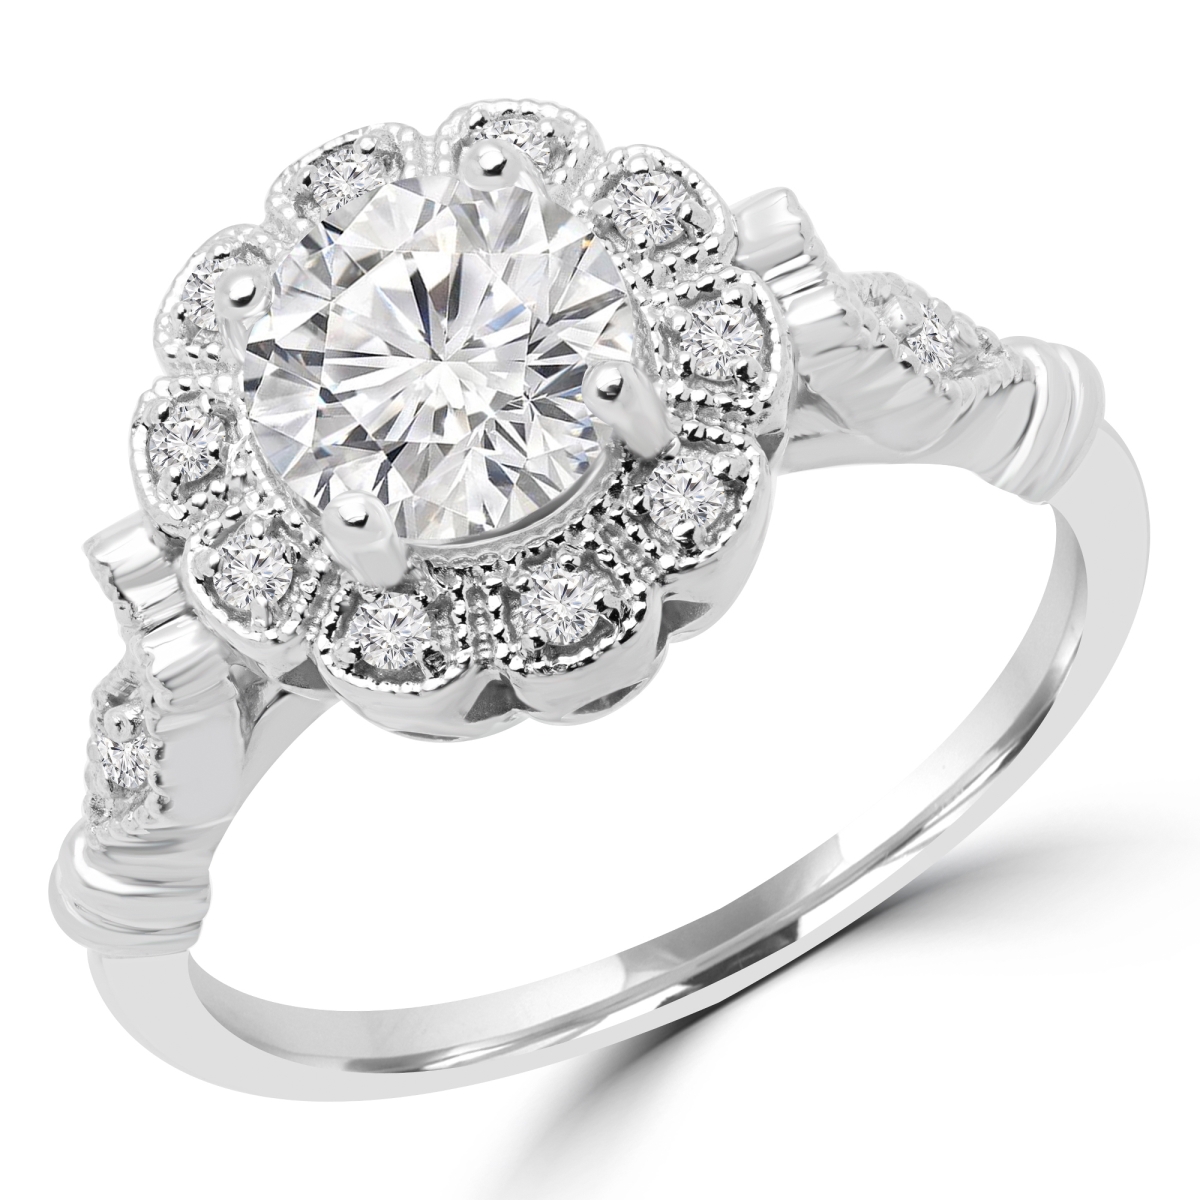 Picture of Majesty Diamonds MD180458-P 0.62 CTW Round Diamond Halo Engagement Ring in 14K White Gold